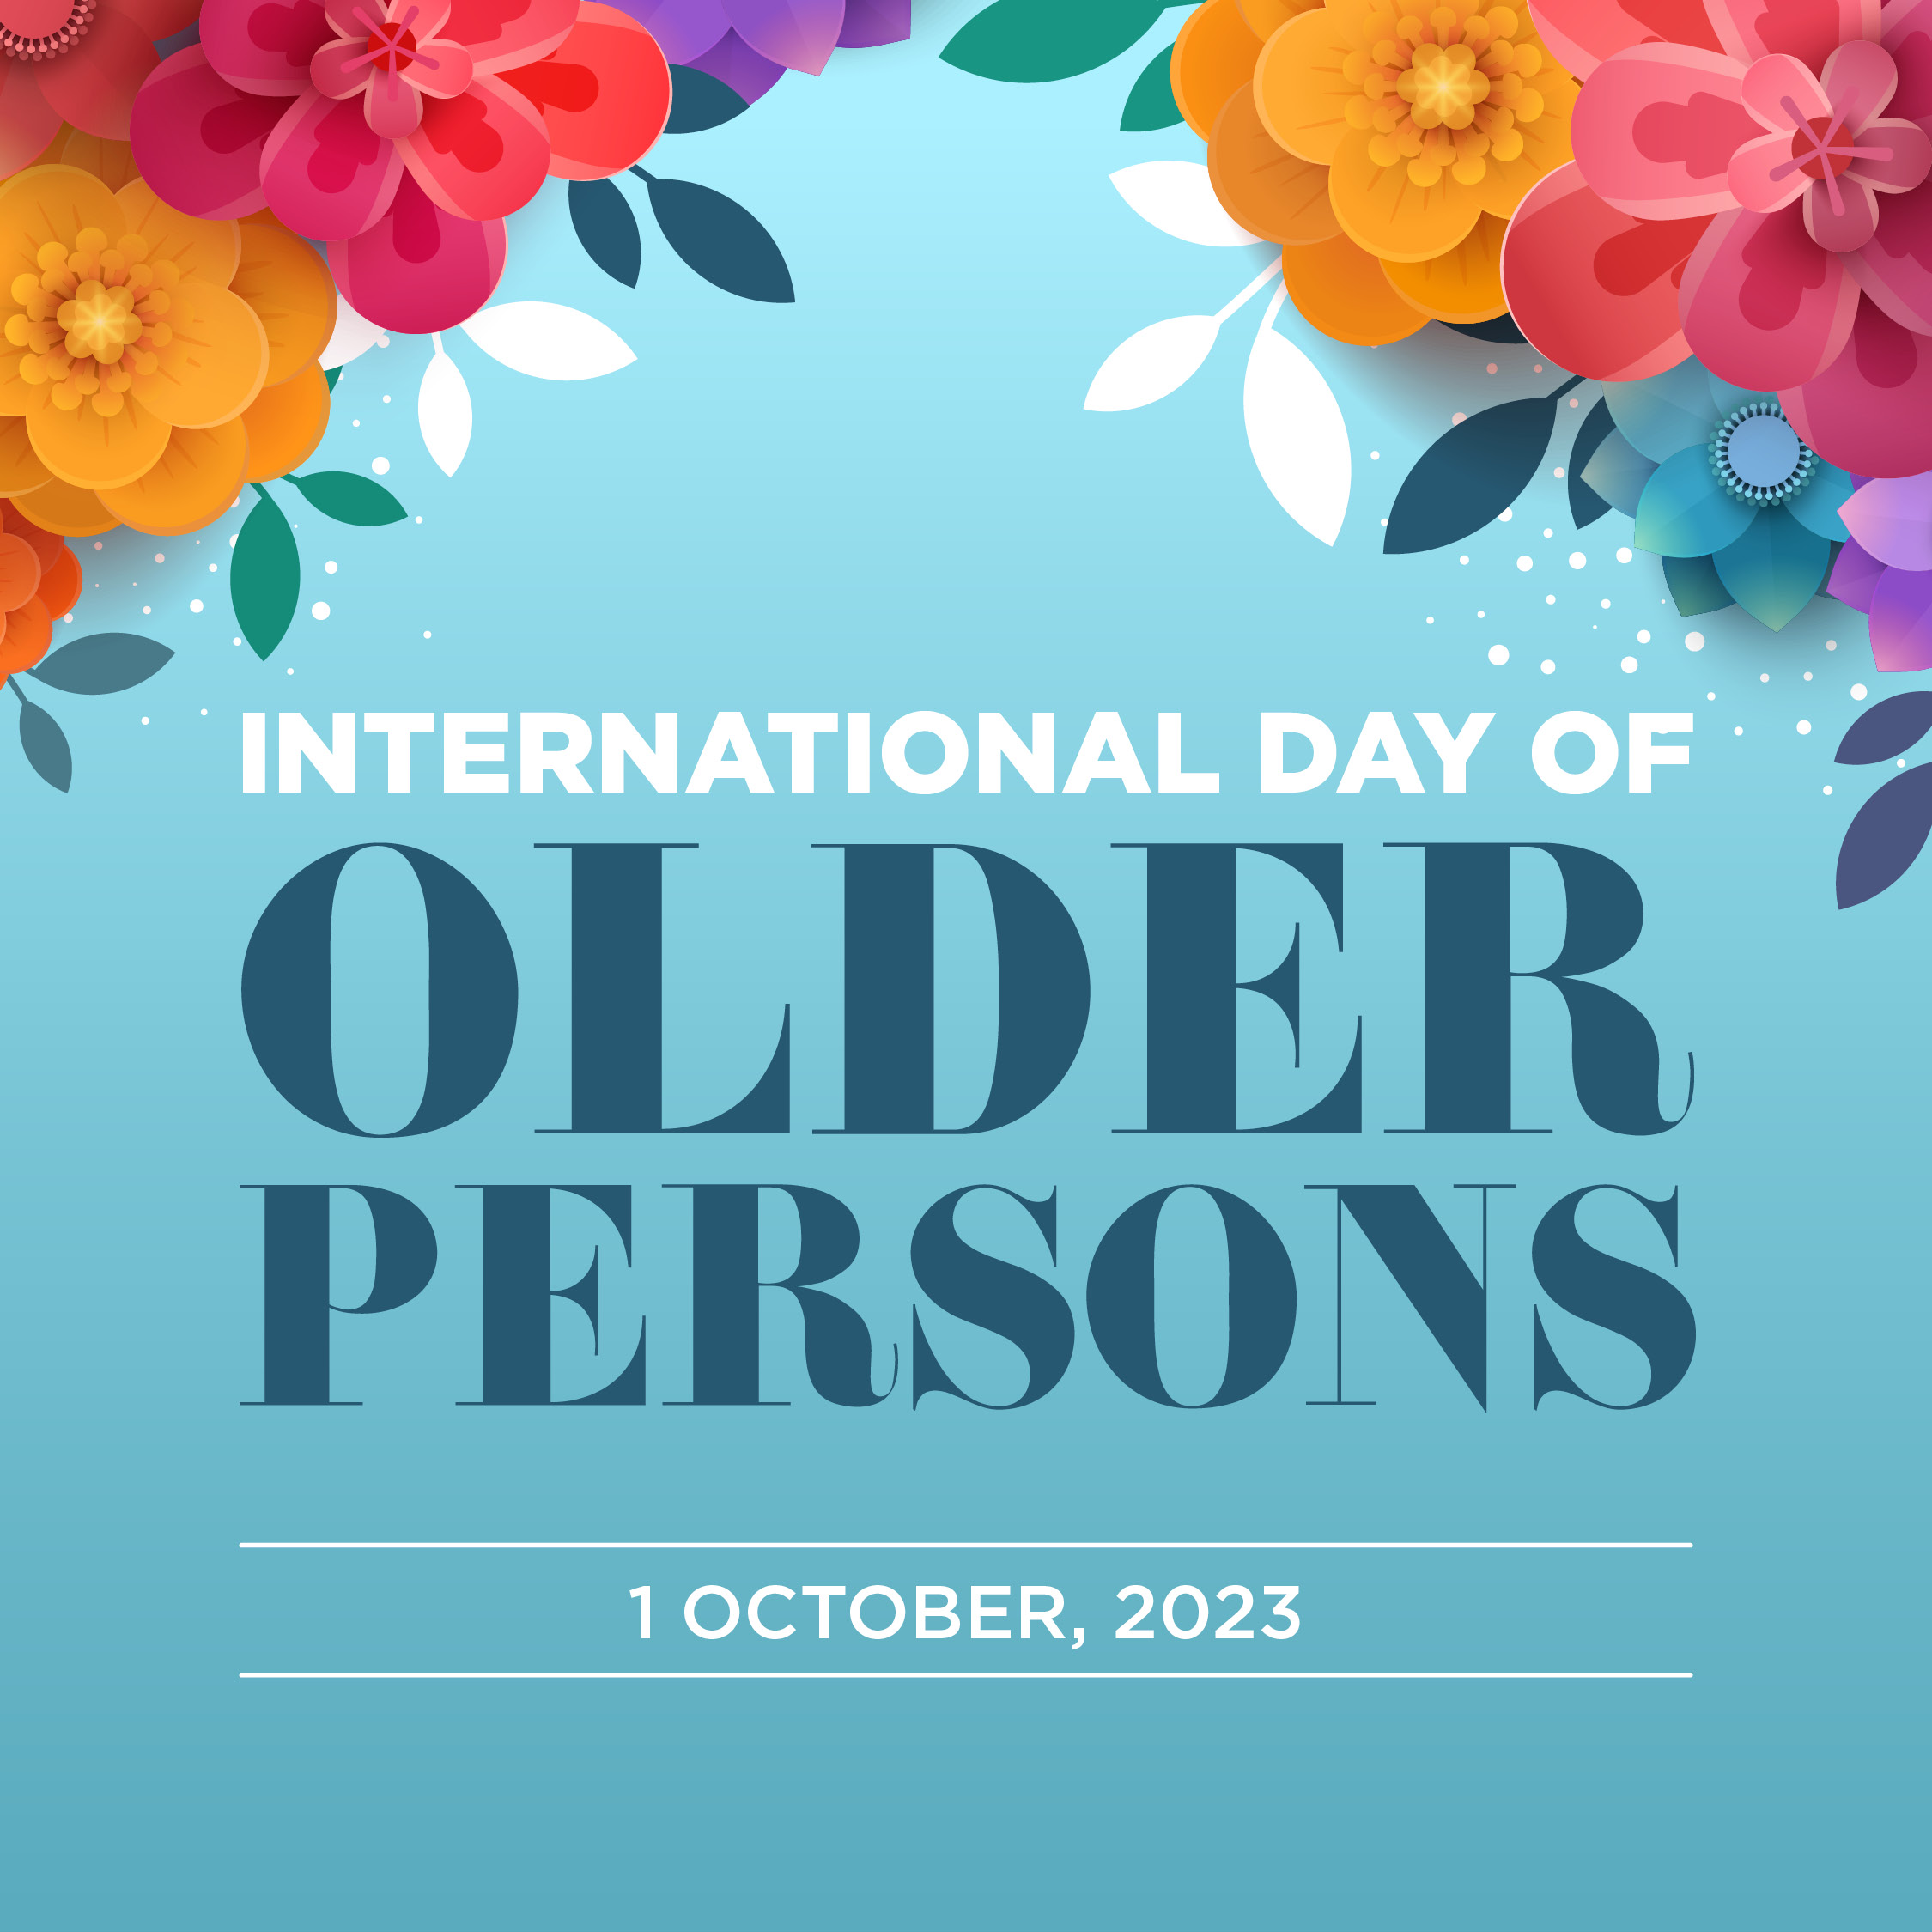 Ingenia Gardens Activate International Day of Older Persons - Oct